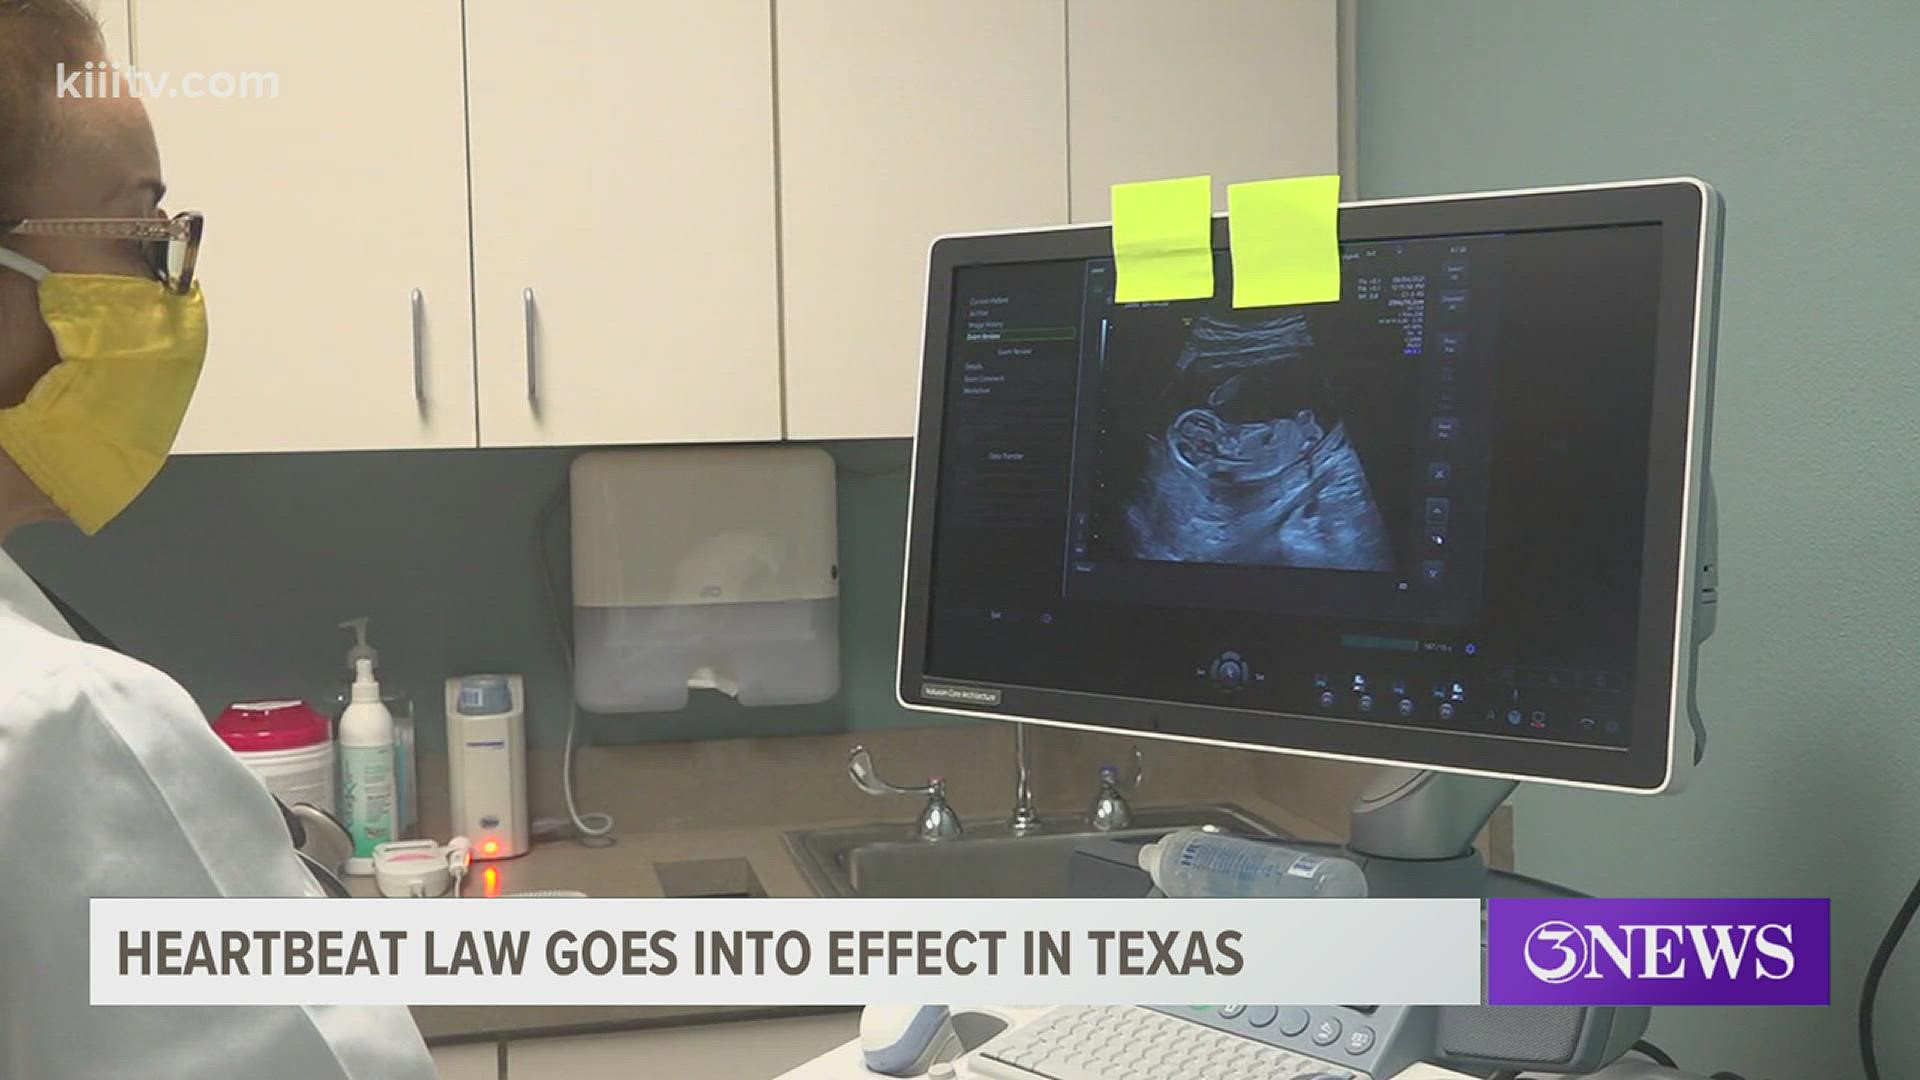 The law bans abortions once a fetal heartbeat is detected, which for some, could be as early as six weeks.